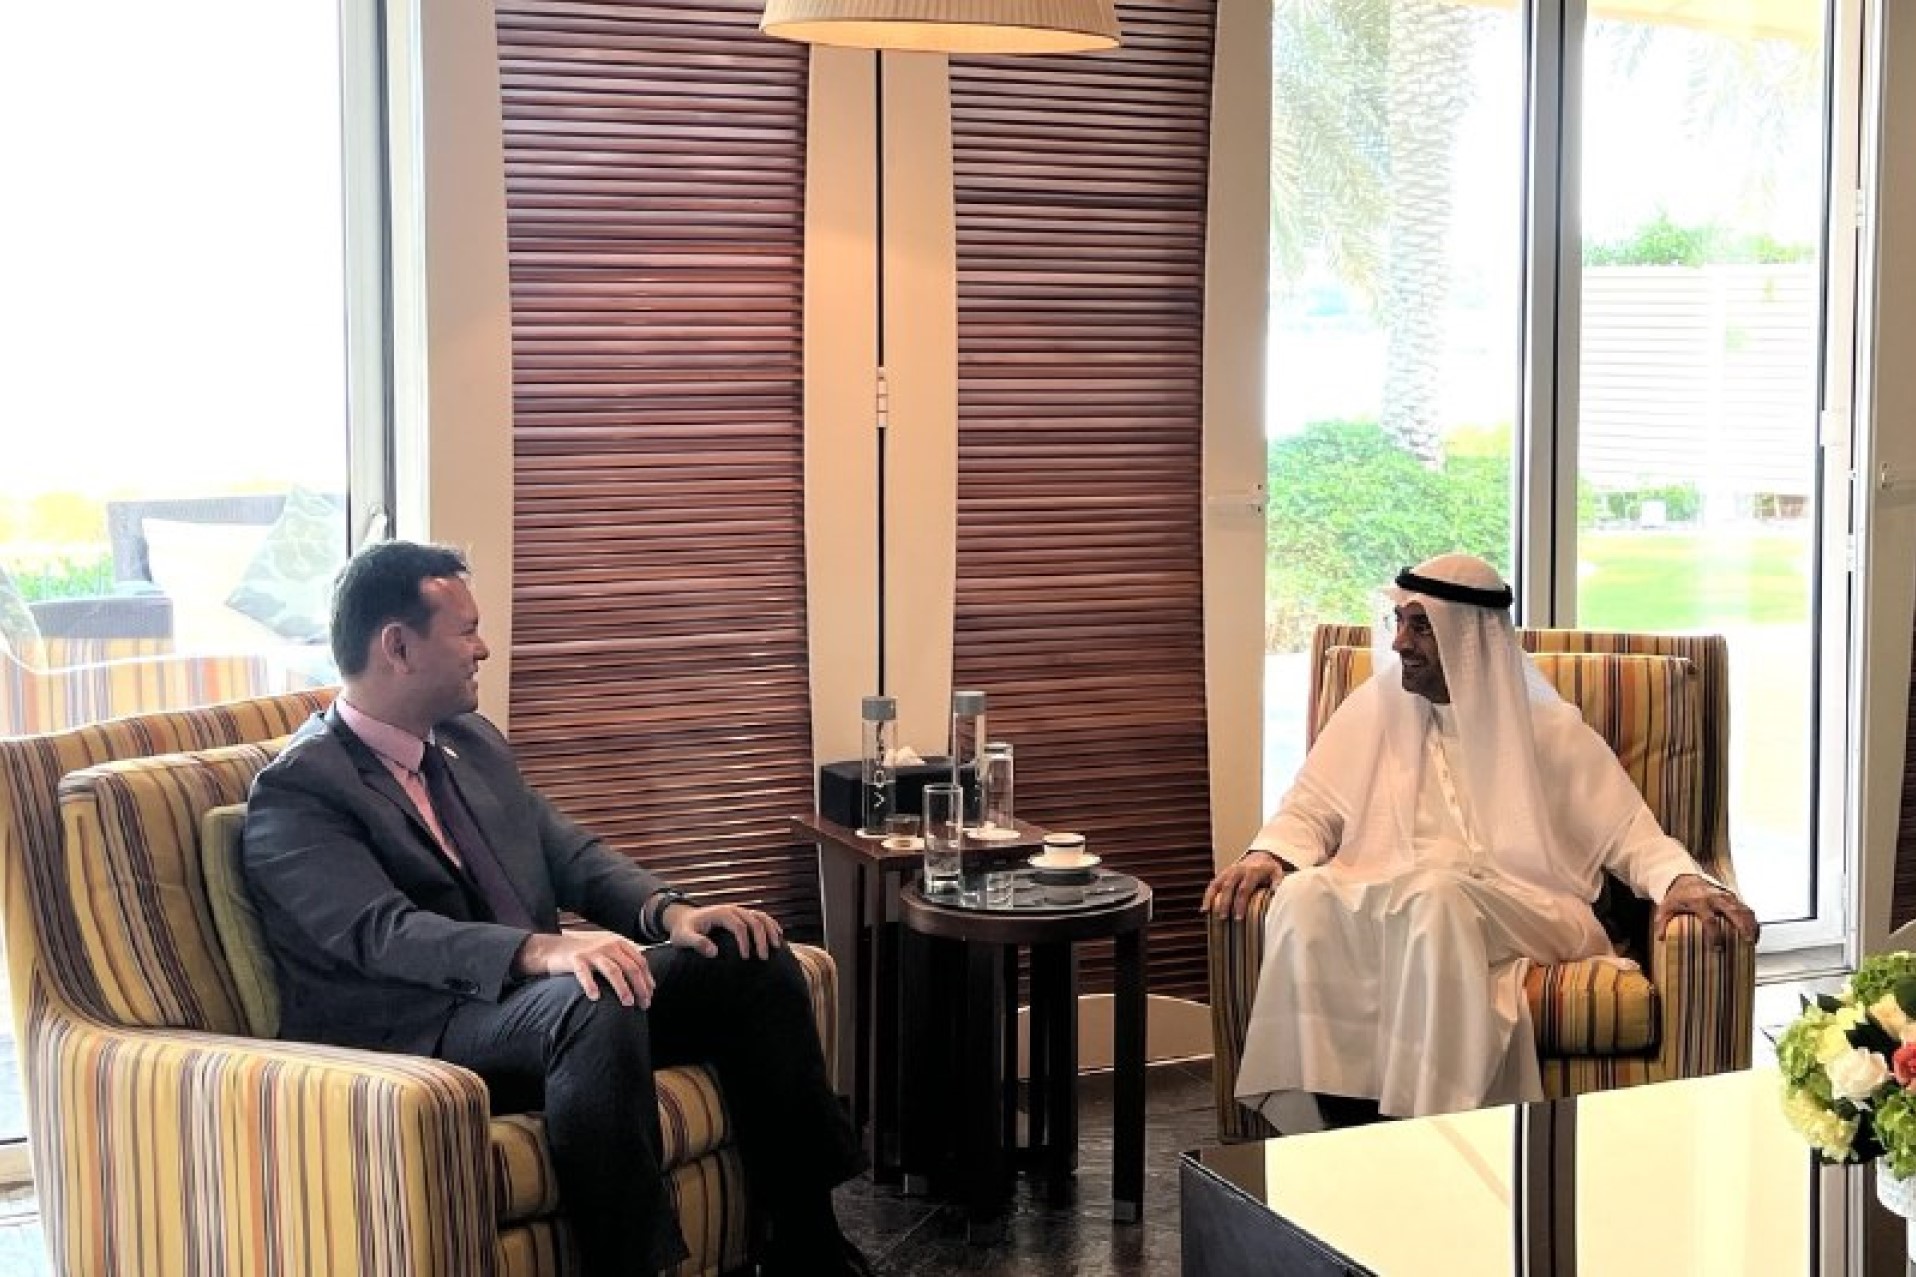 Mr Zaqy (left) meeting Secretary General of the Gulf Cooperation Council Dr Nayef Falah Al-Hajraf (right).